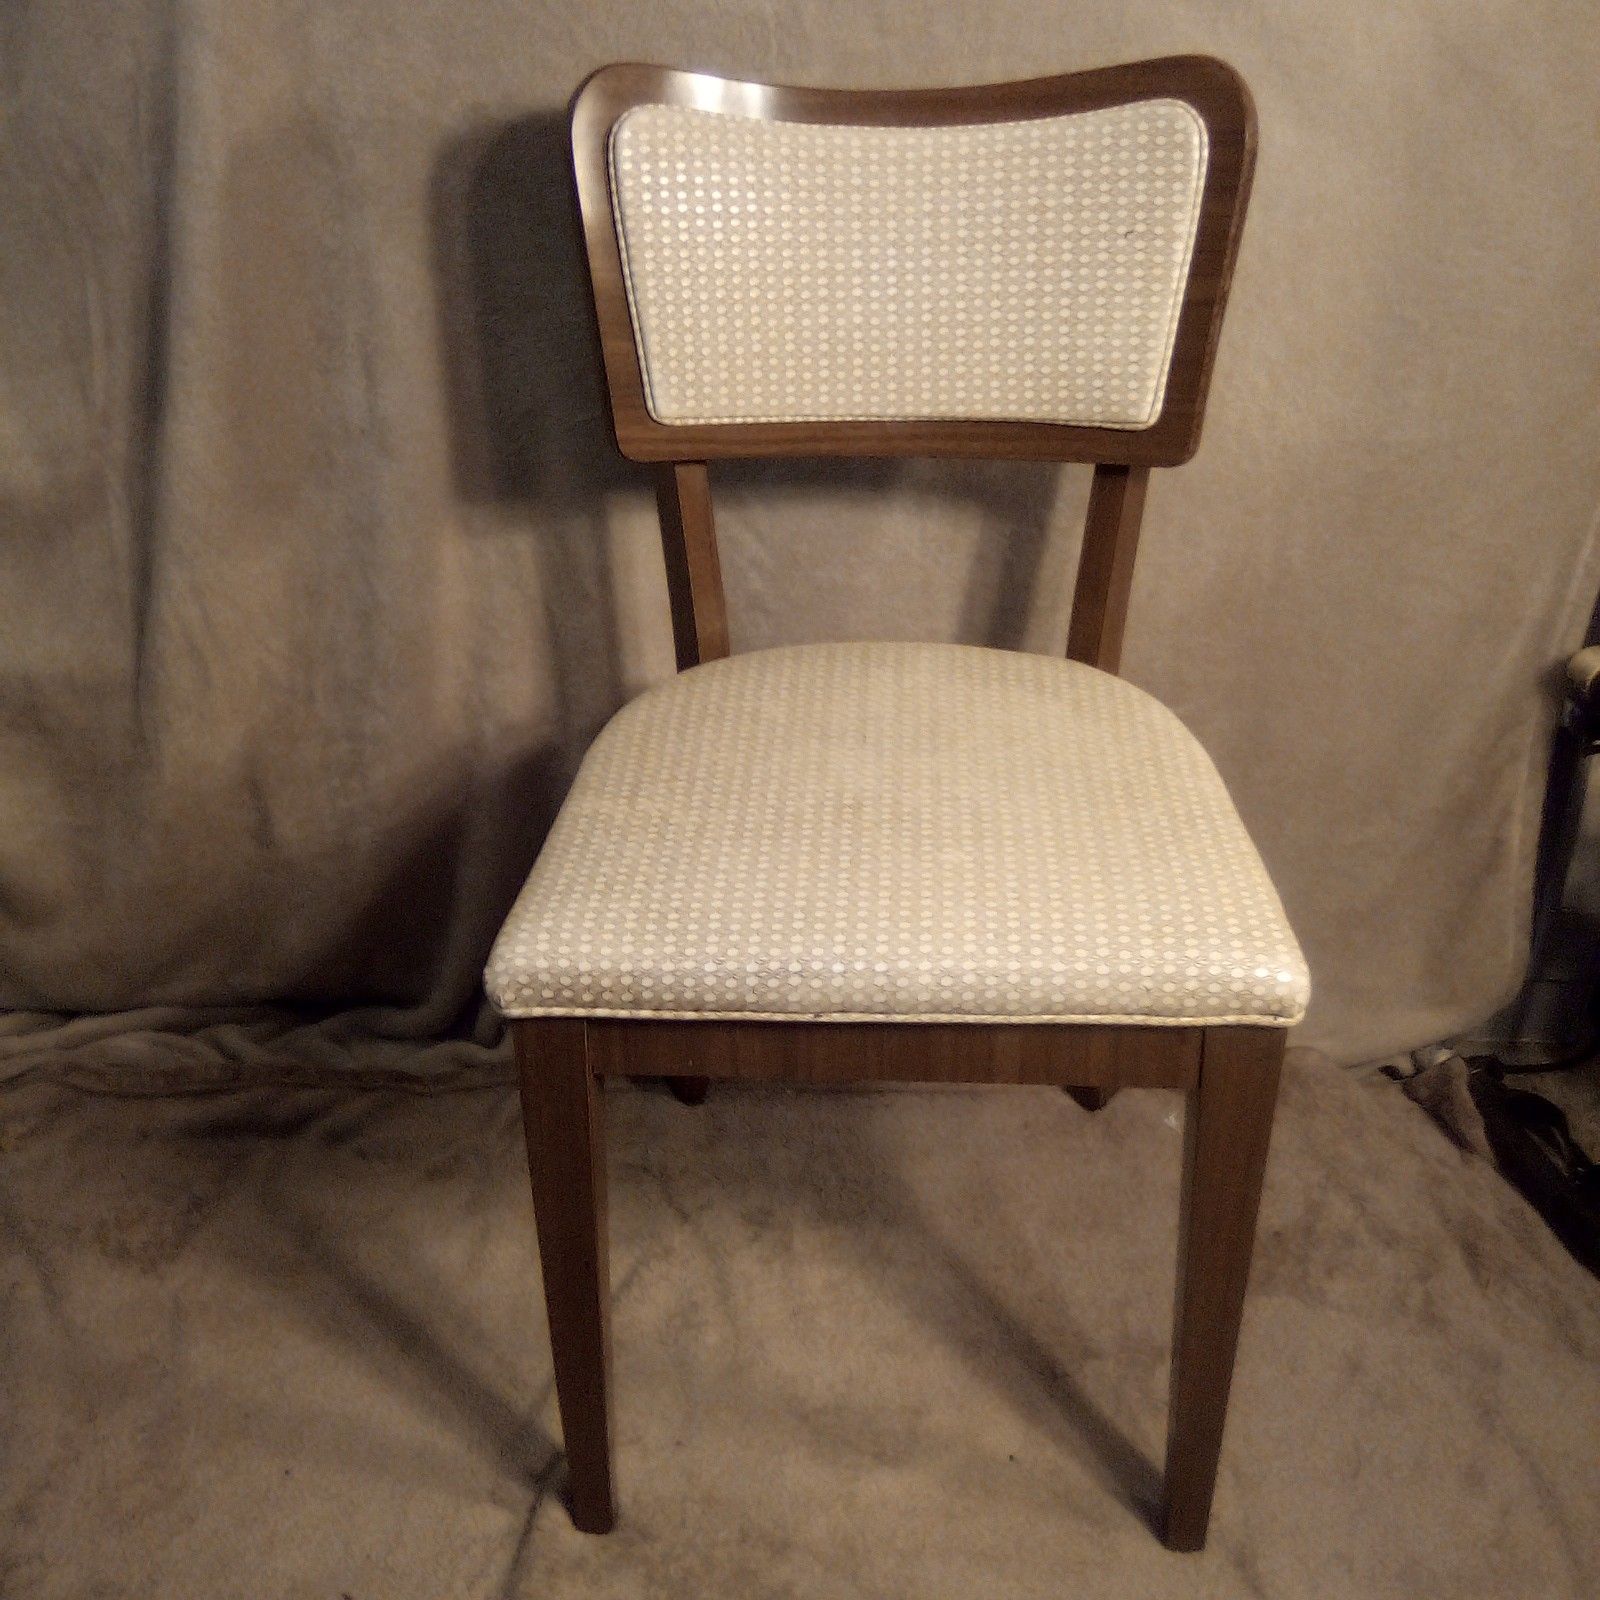 Antique really cool upholstered chair